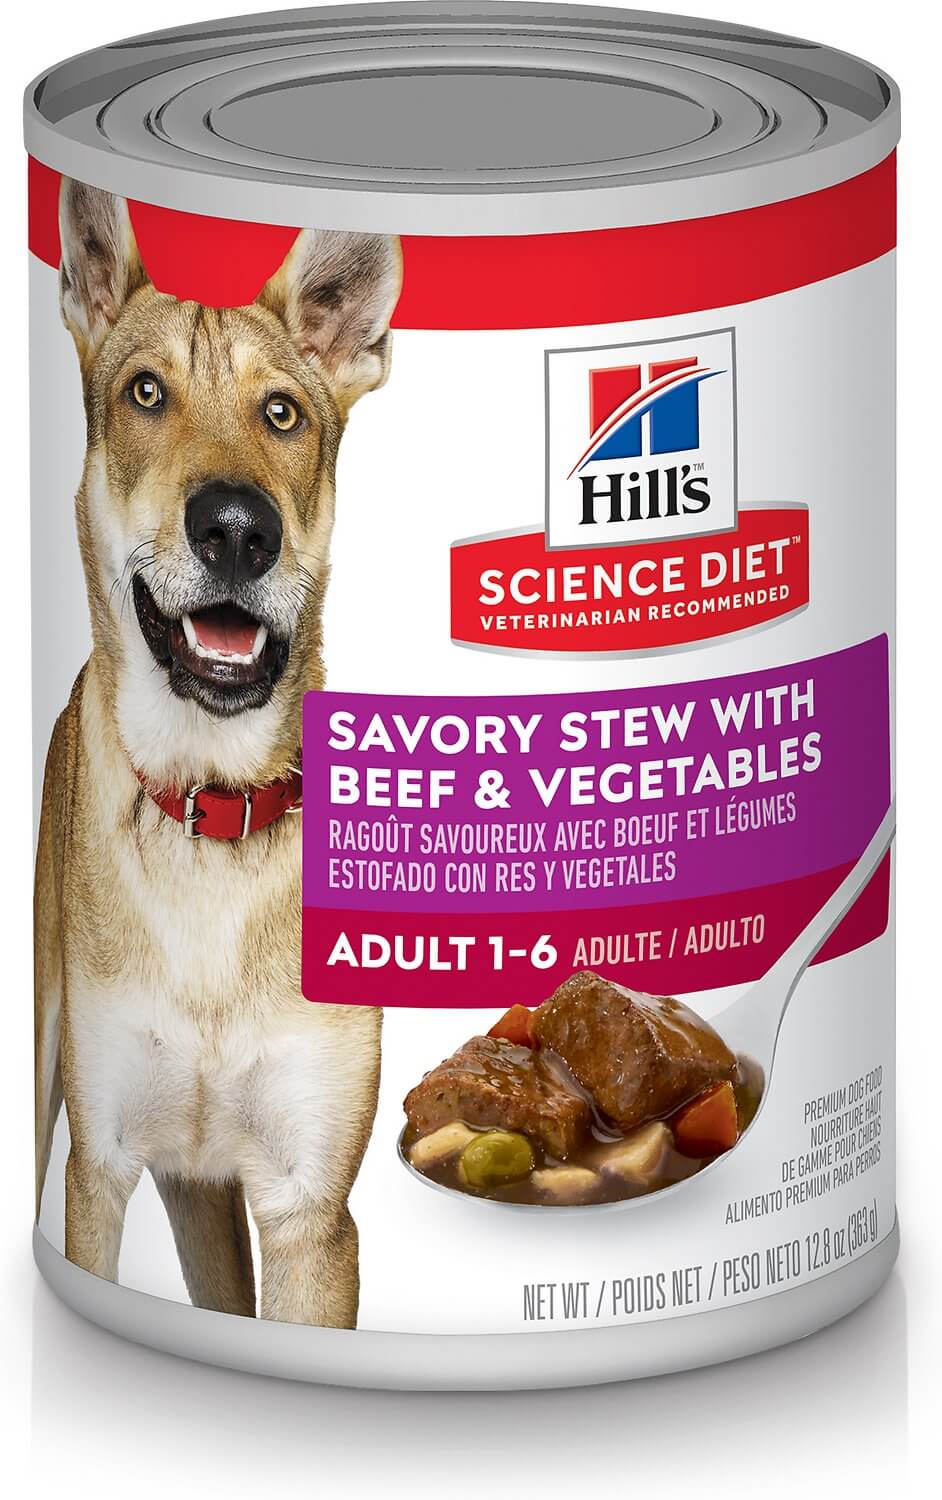 hill-s-science-diet-adult-canned-dog-food-review-dogfoodadvisor